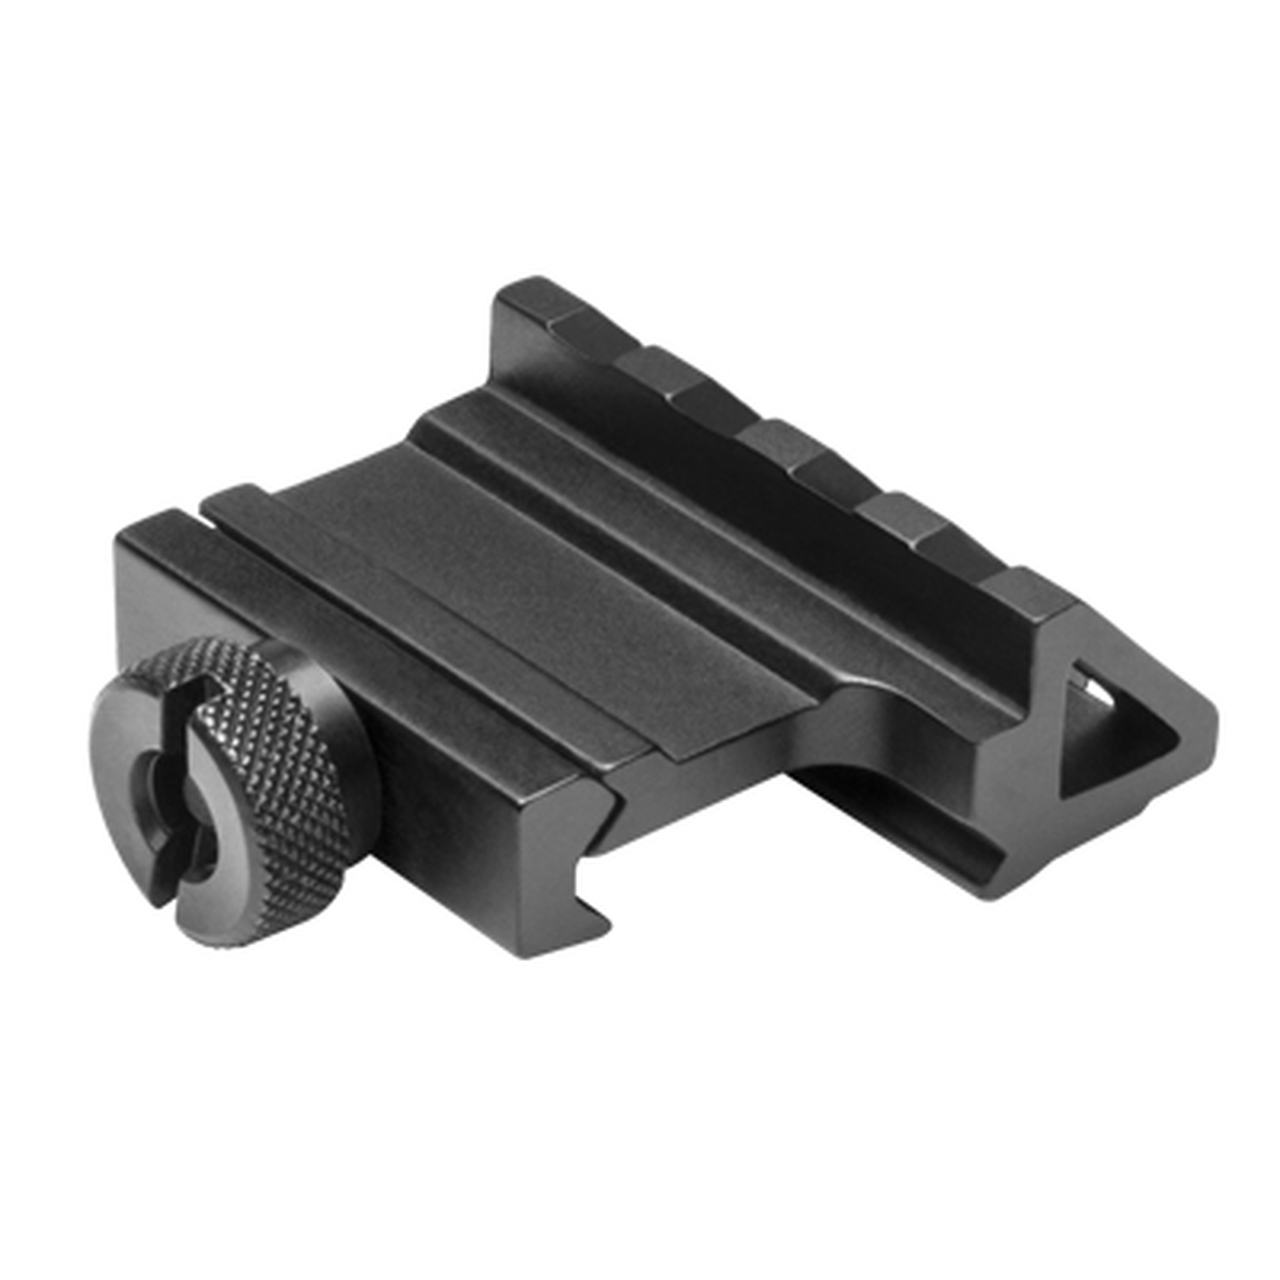 Compare prices for ACEXIER 1 Offset Picatinny